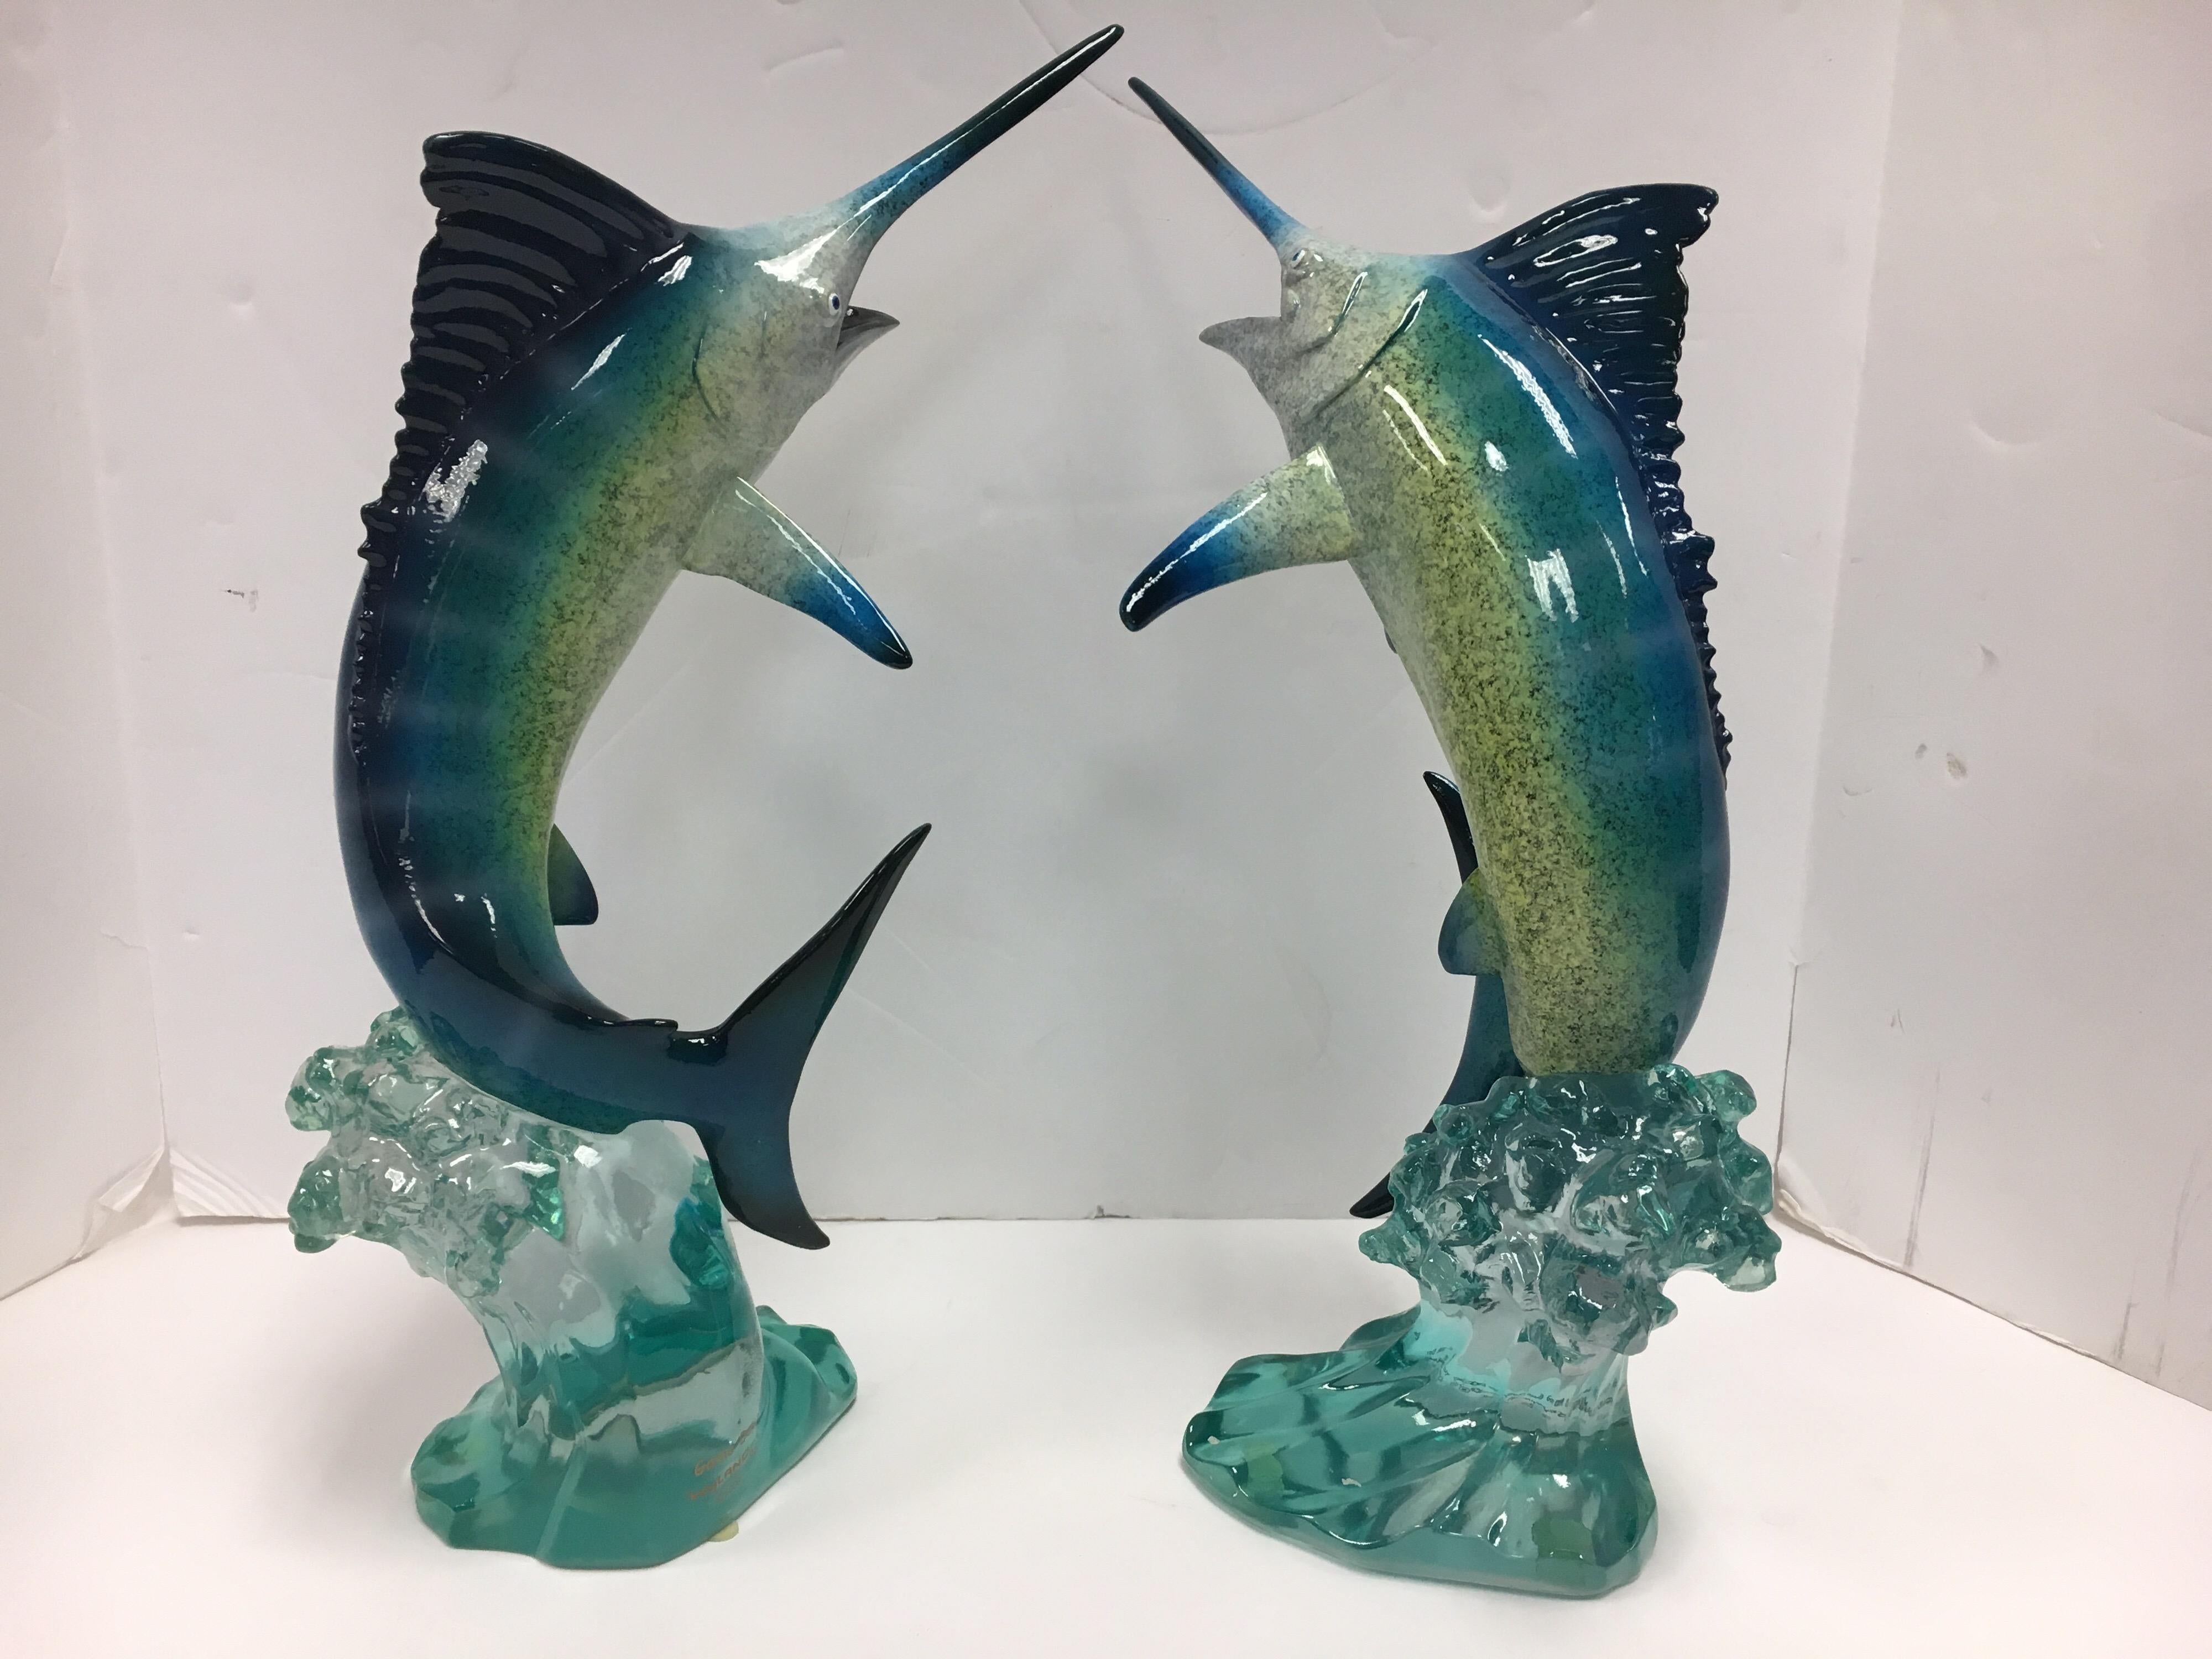 Elegant pair of Lucite sculptures from Robert Wyland with signature/hallmarks at base.